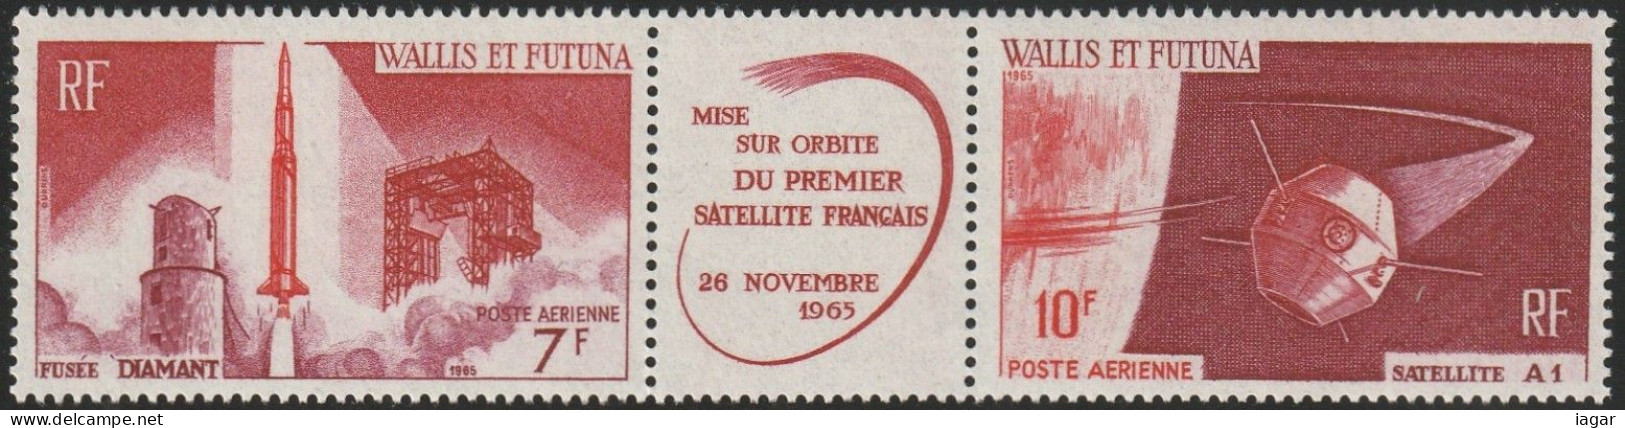 THEMATIC SPACE:  LAUNCH OF THE FIRST FRENCH SATELLITE IN HAMMAGUIR. TRIPTYCH  -  WALLIS AND FUTUNA - Oceania